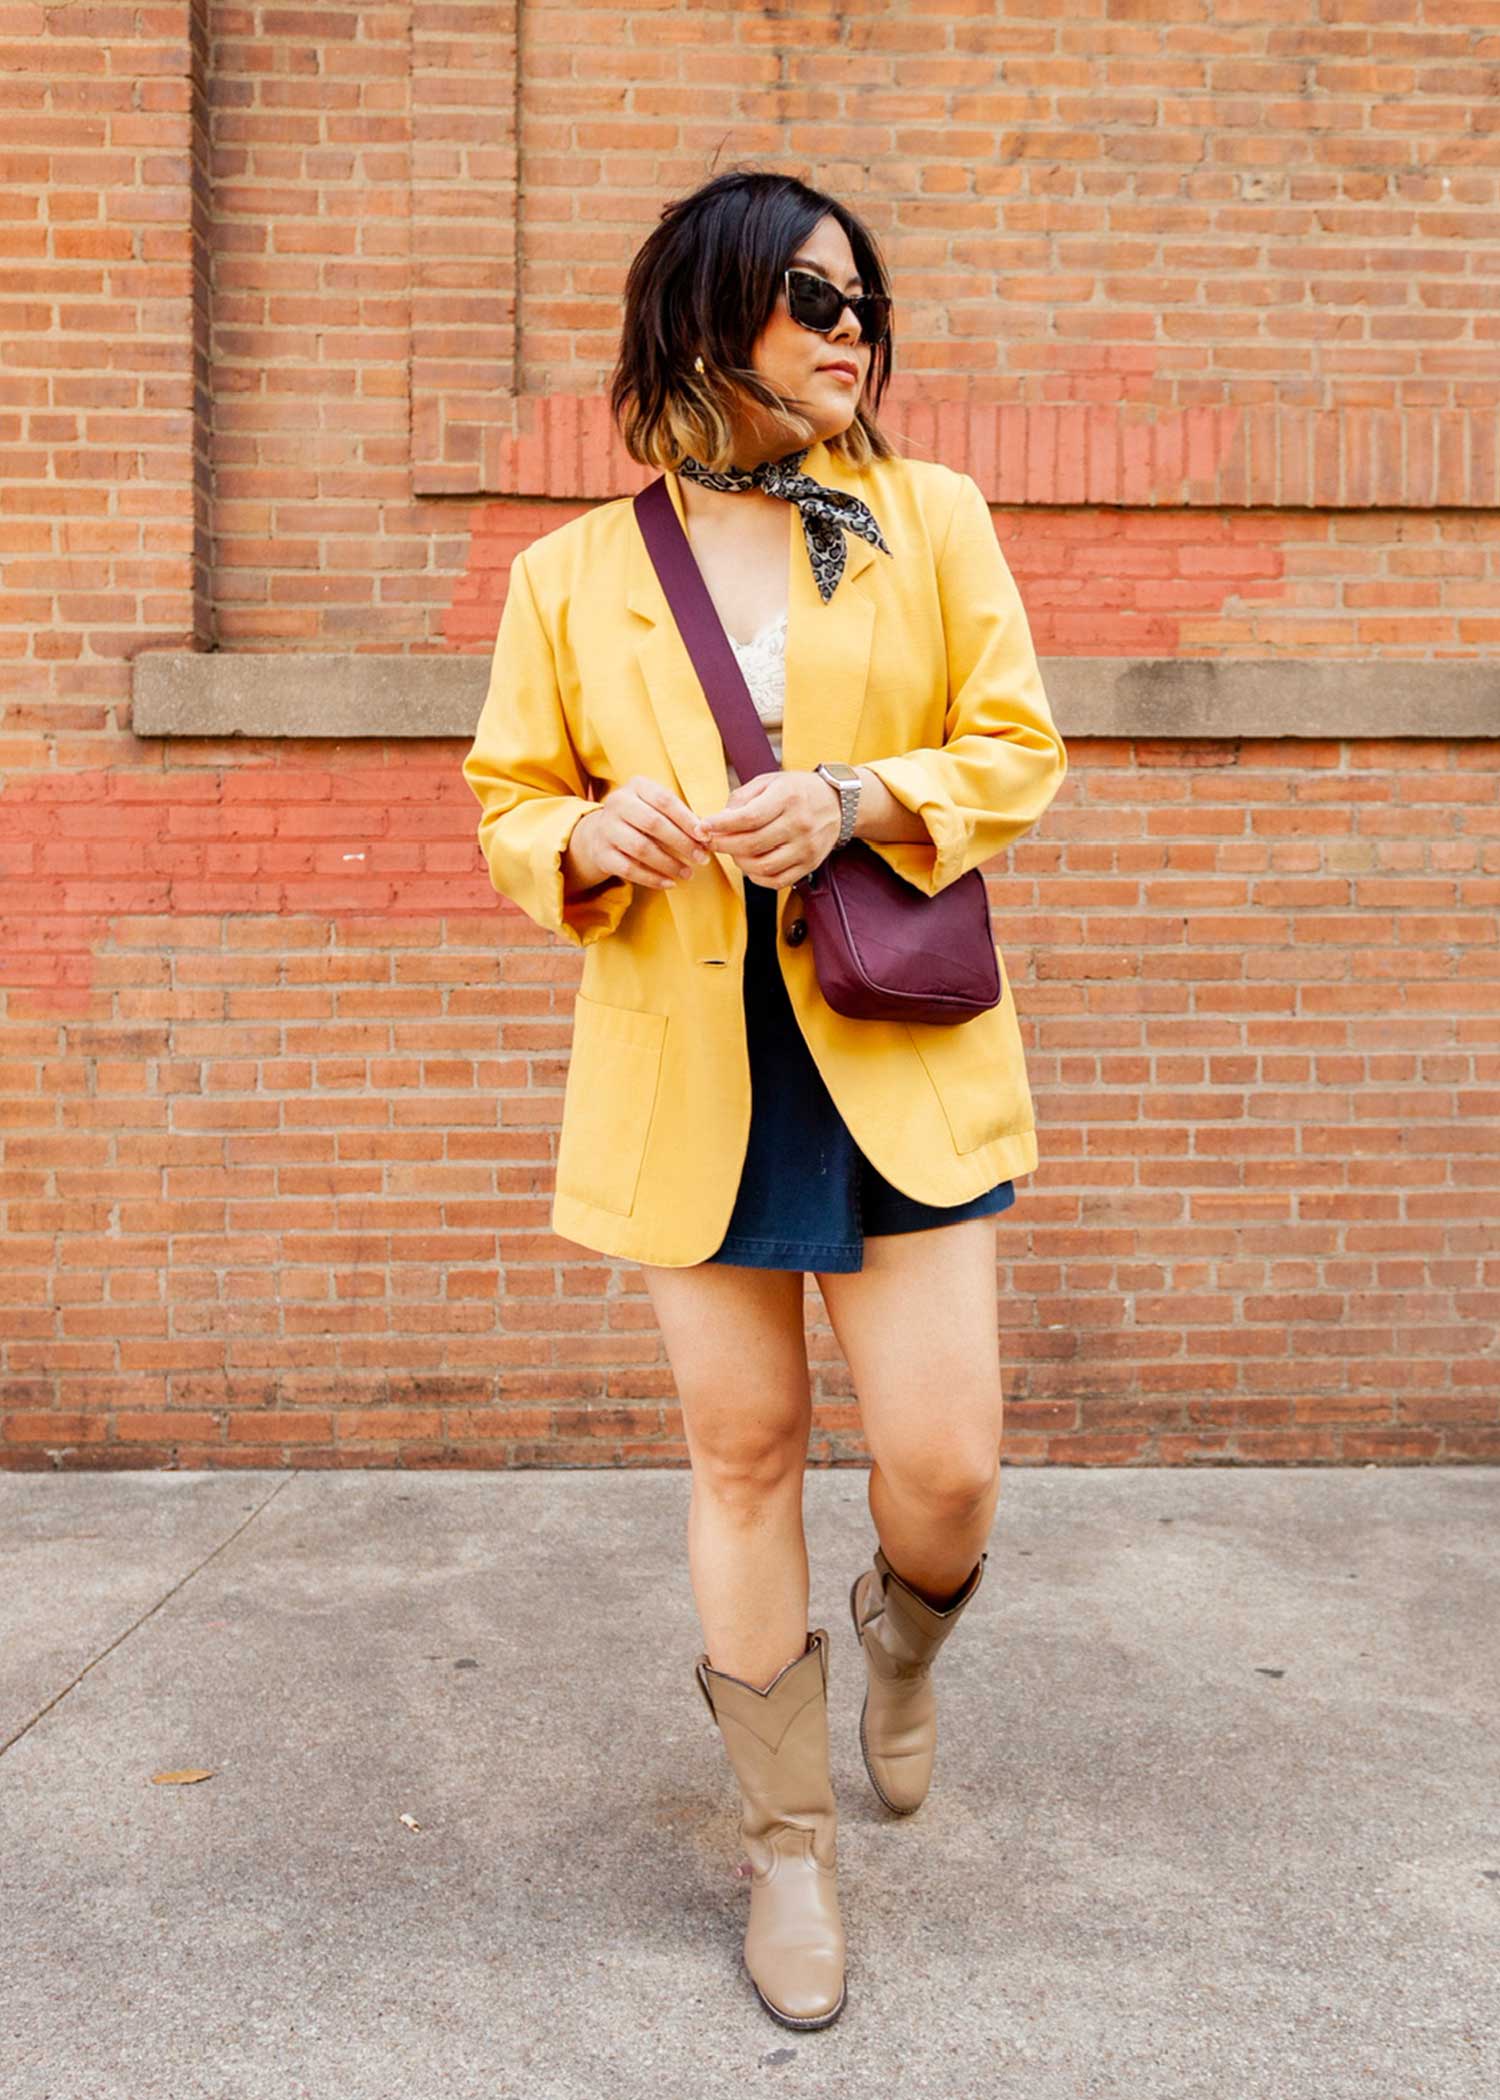 Girl posing in front of a brick wall wearing shorts and an oversized yellow blazer